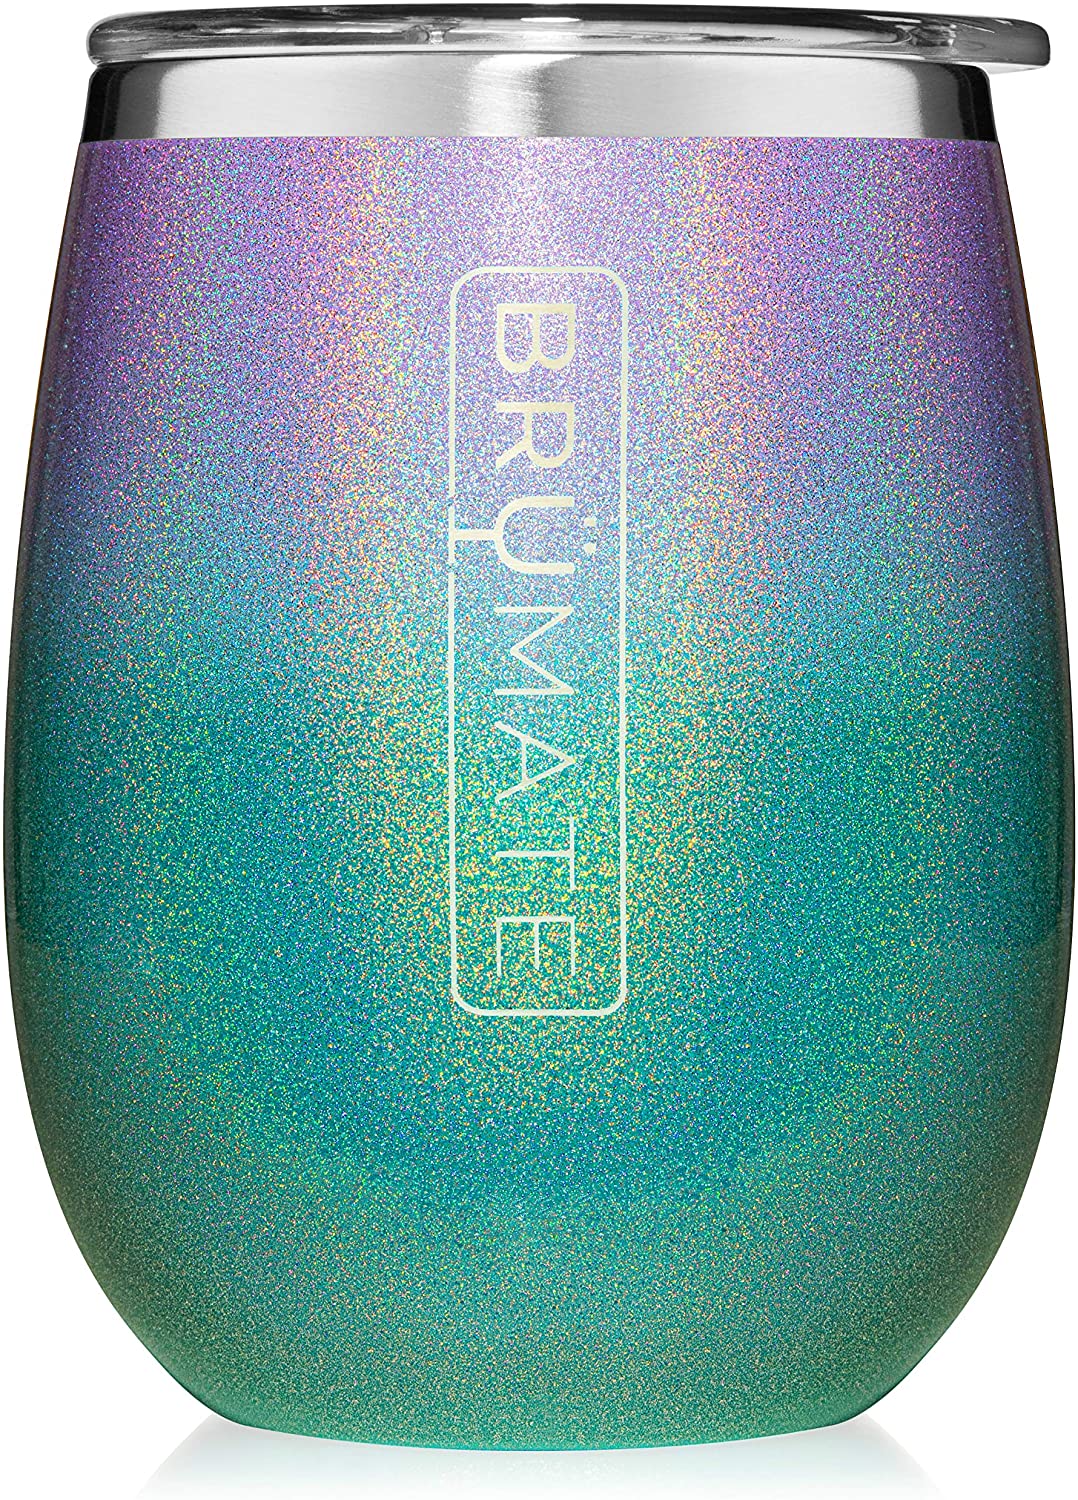 brumate wine tumbler, gifts for girlfriend, valentines gifts for girlfriend